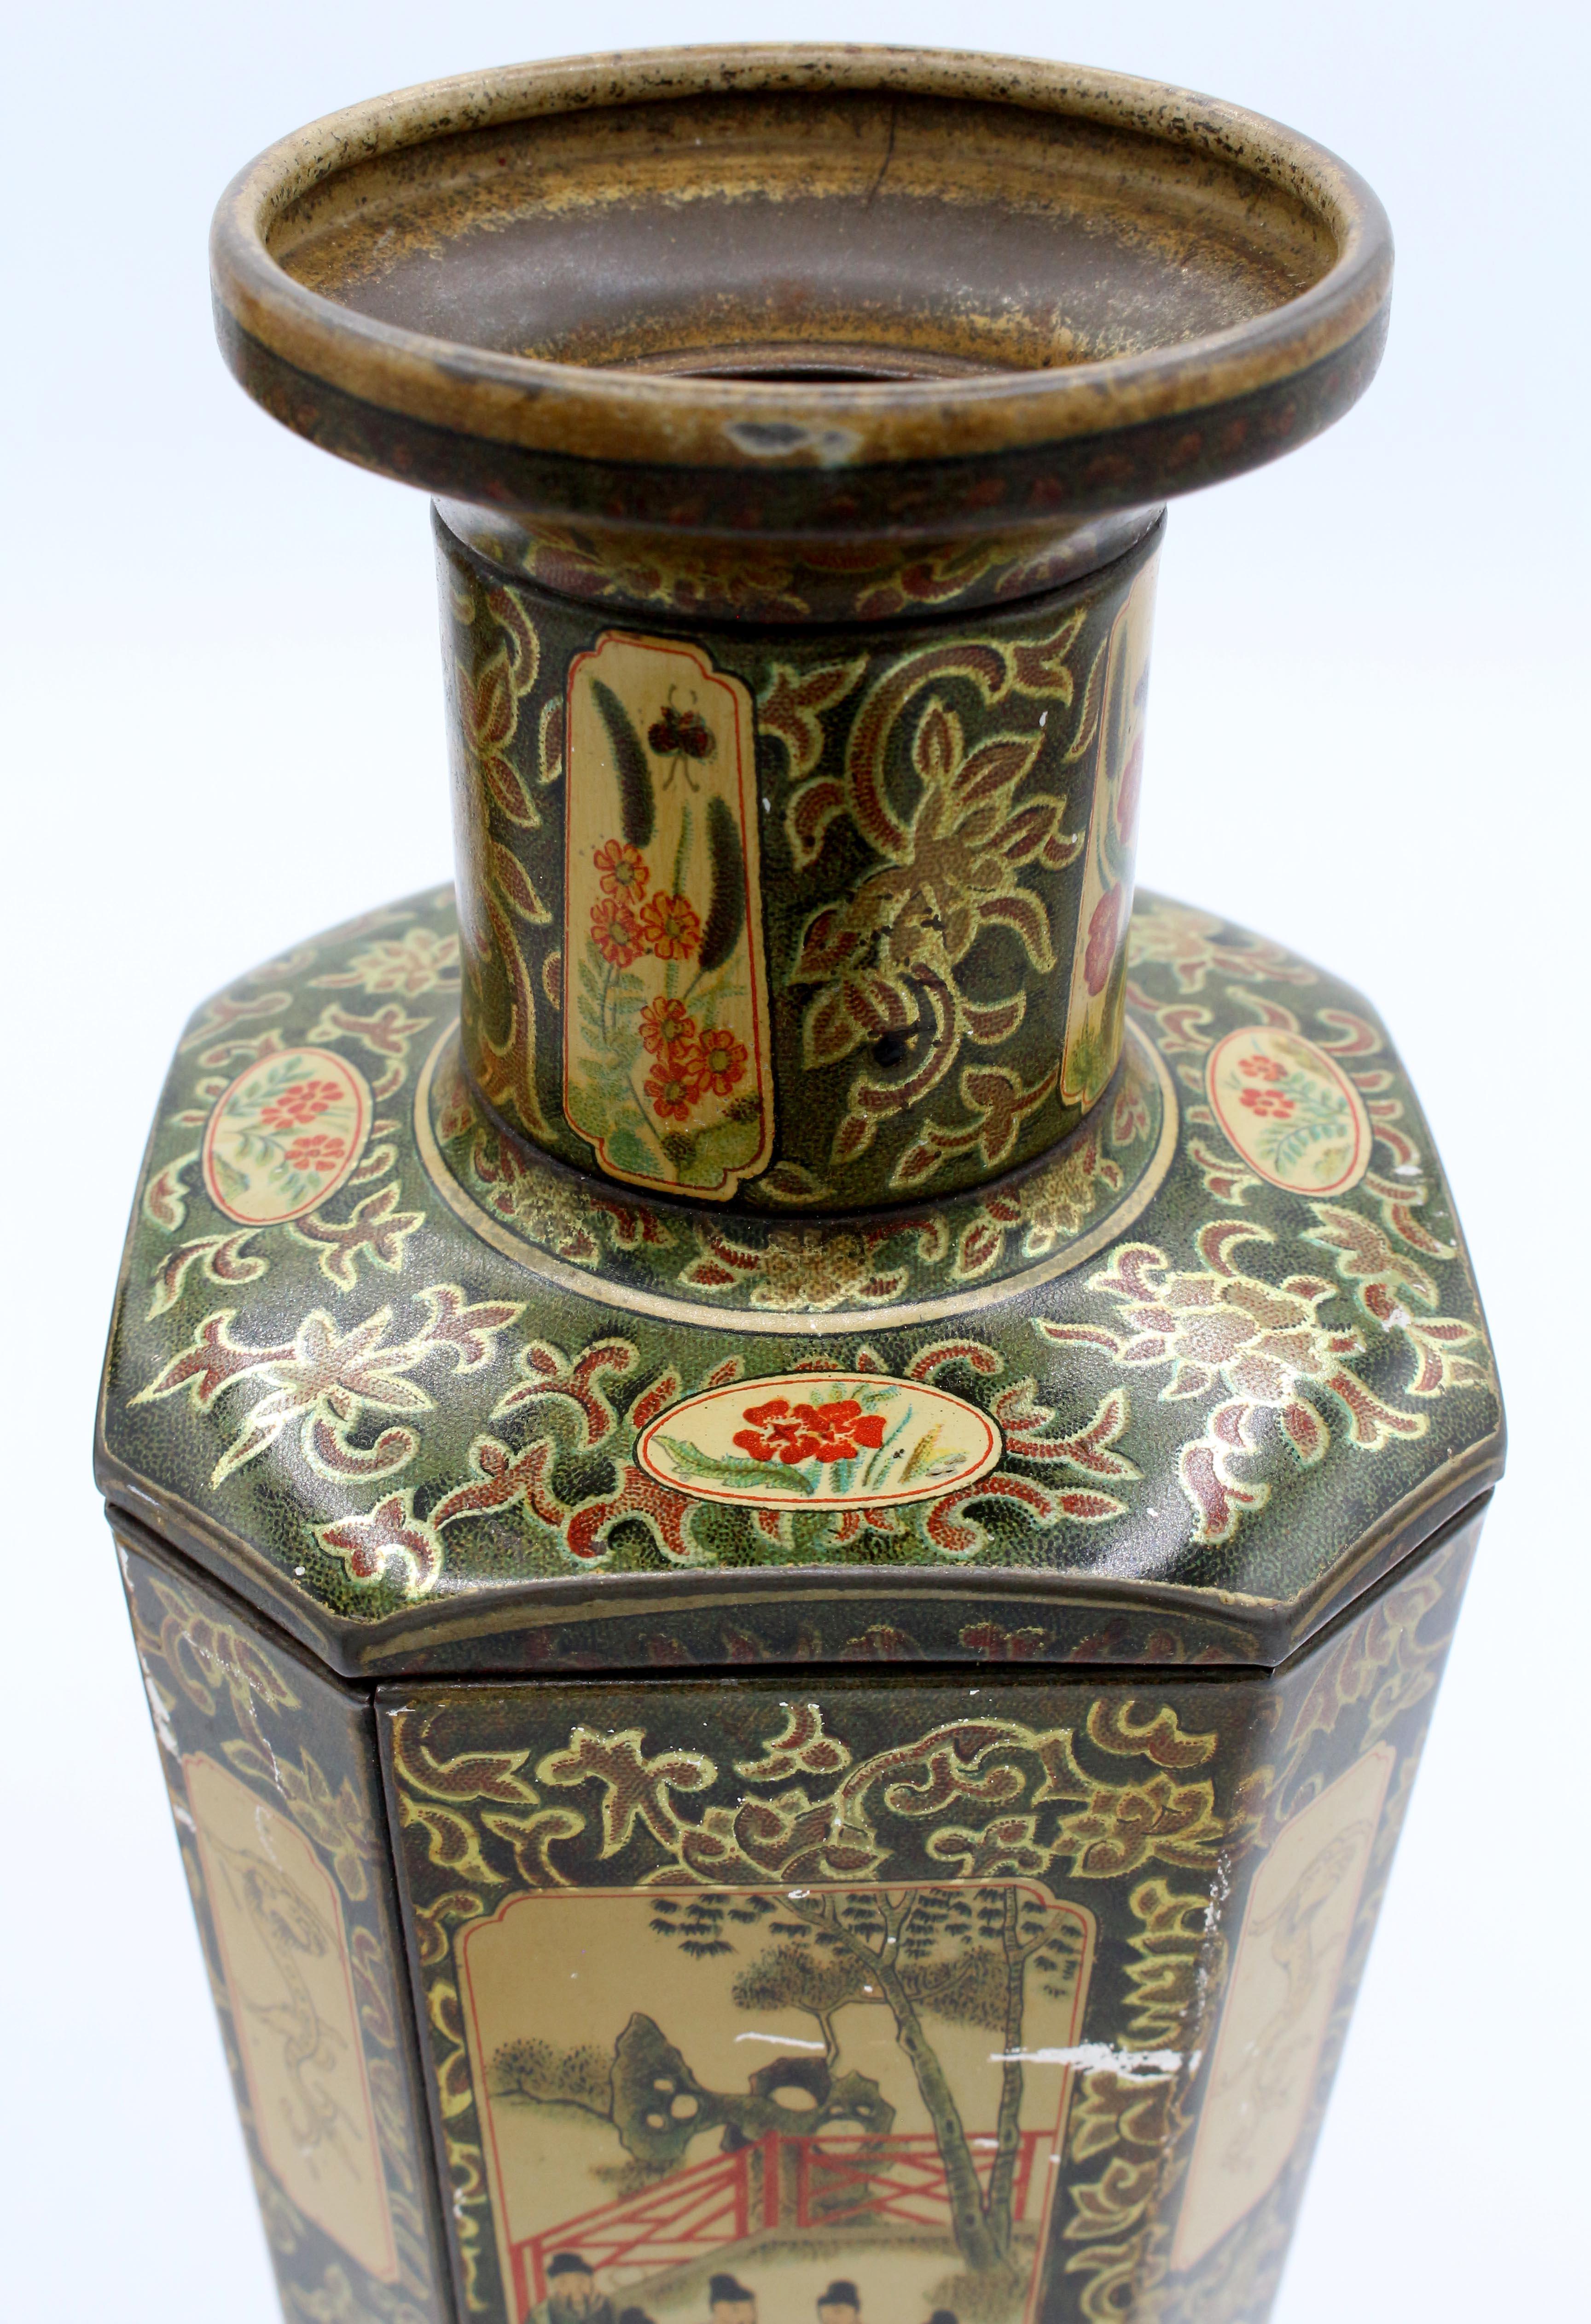 Pair of Vase Form Biscuit Tin Boxes by Huntley & Palmers, 1928, English For Sale 4